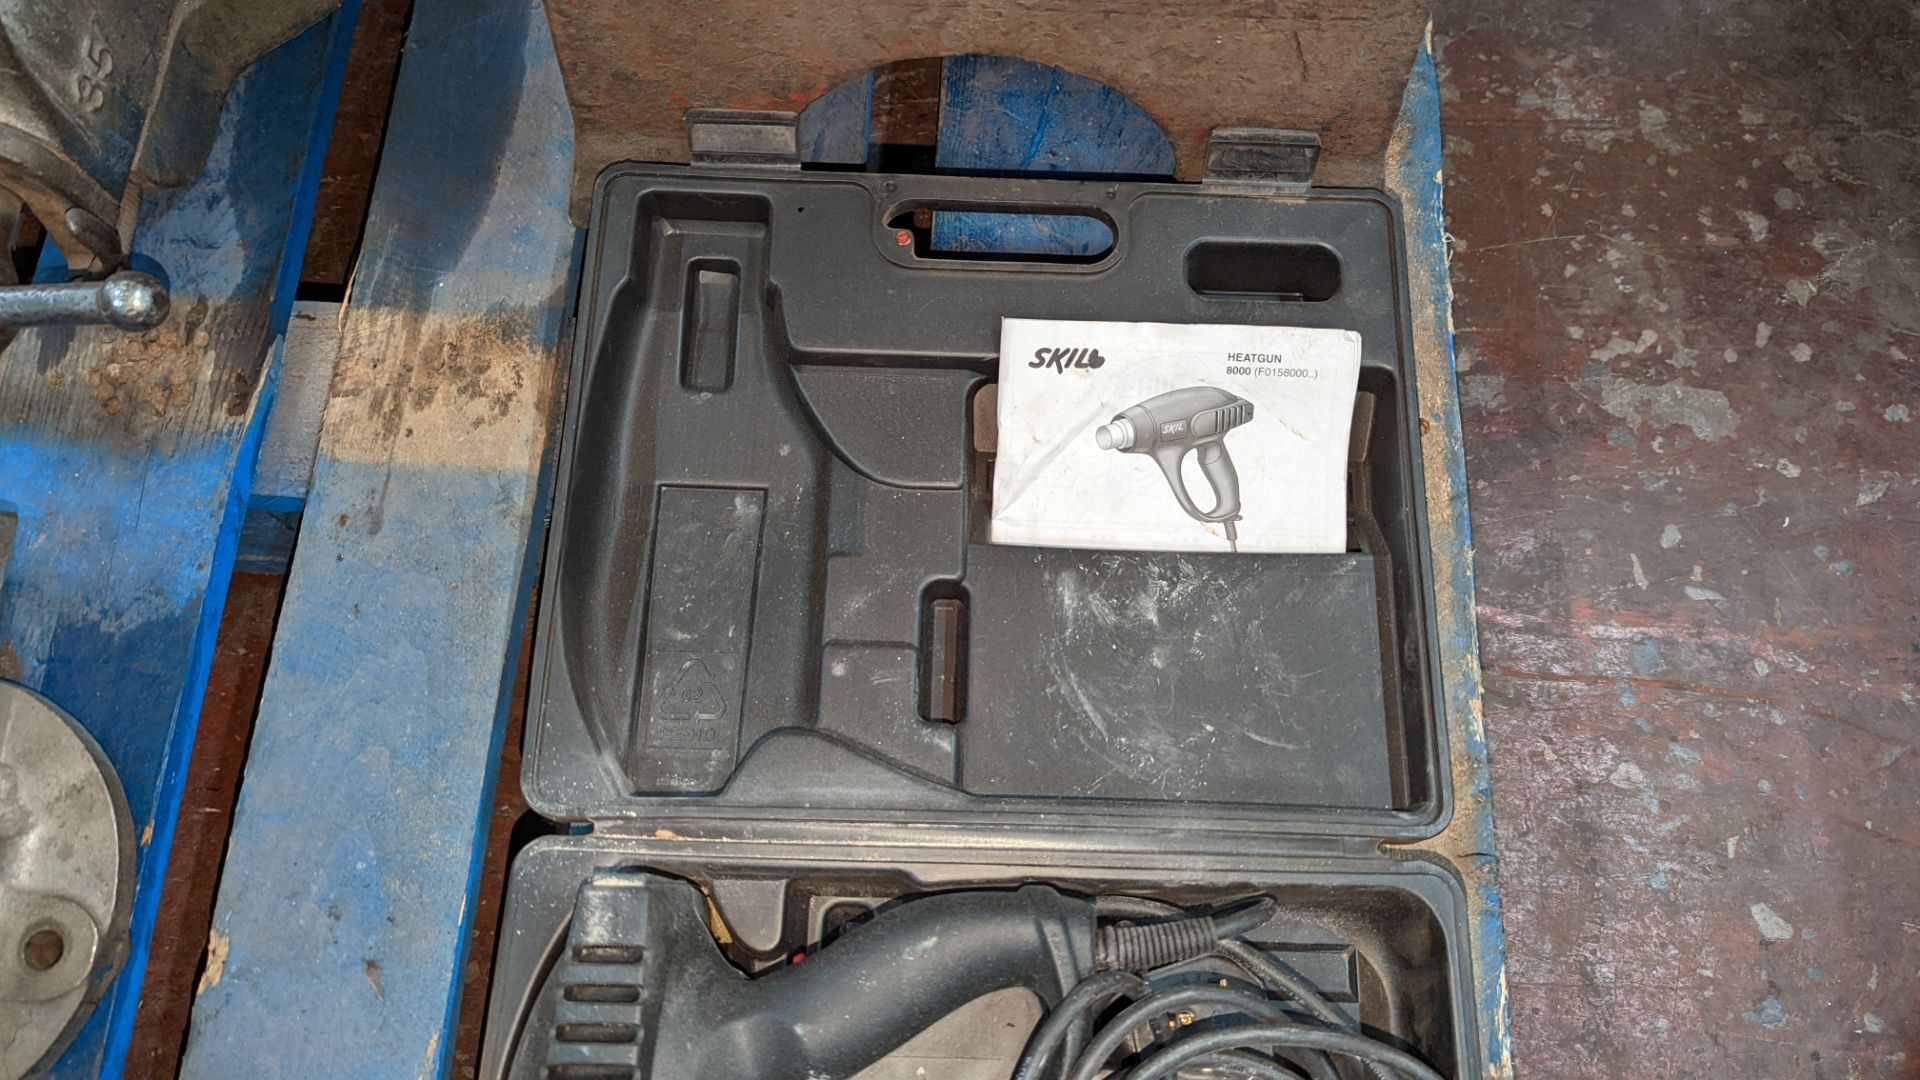 Skill heat gun in case with ancillaries, 1600w - Image 4 of 6